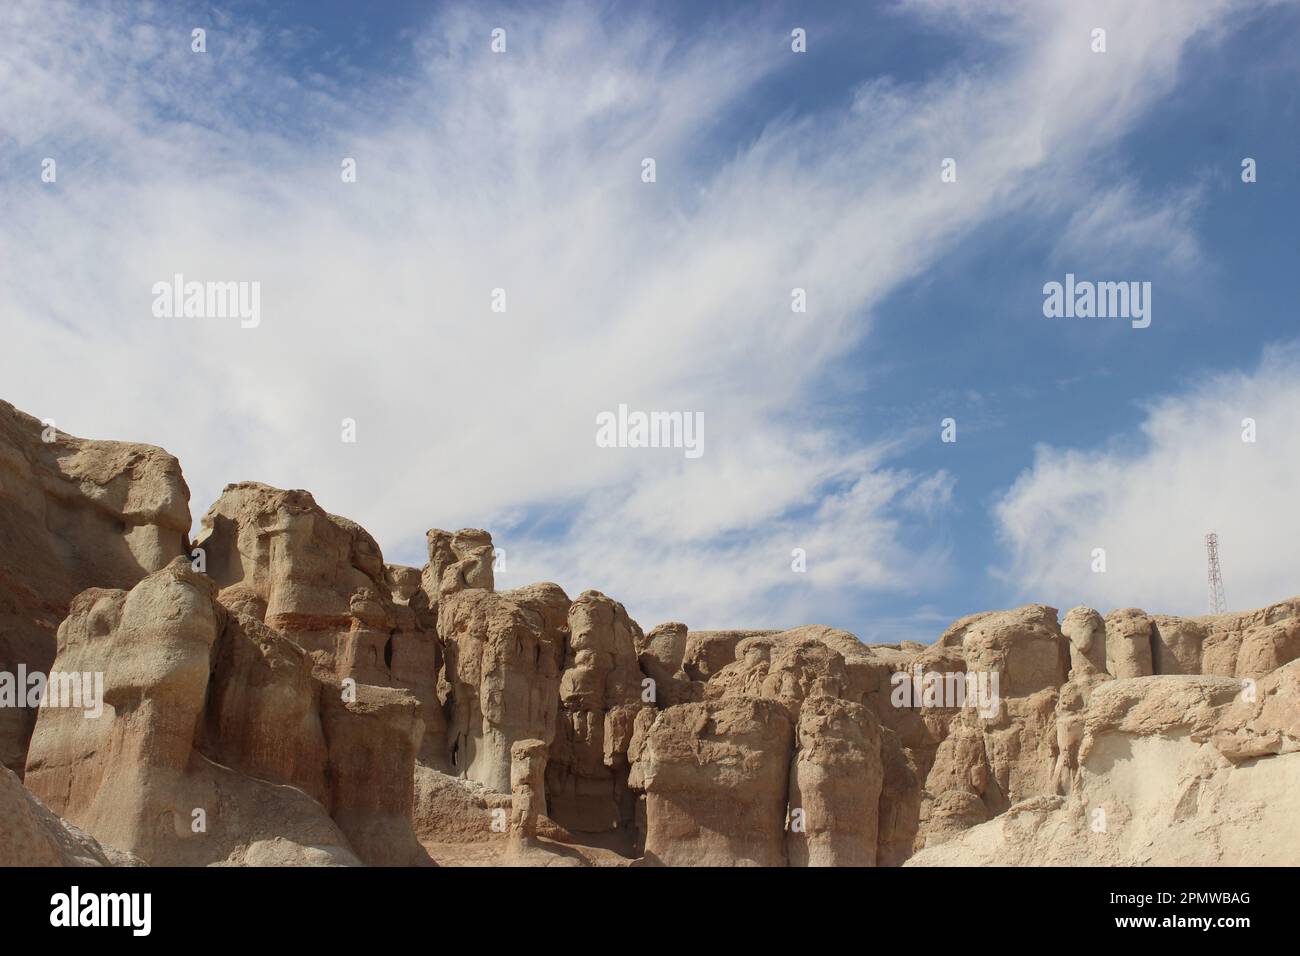 The light brown rock formations against the background of the blue sky. Al-Ahsa, Saudi Arabia. Stock Photo